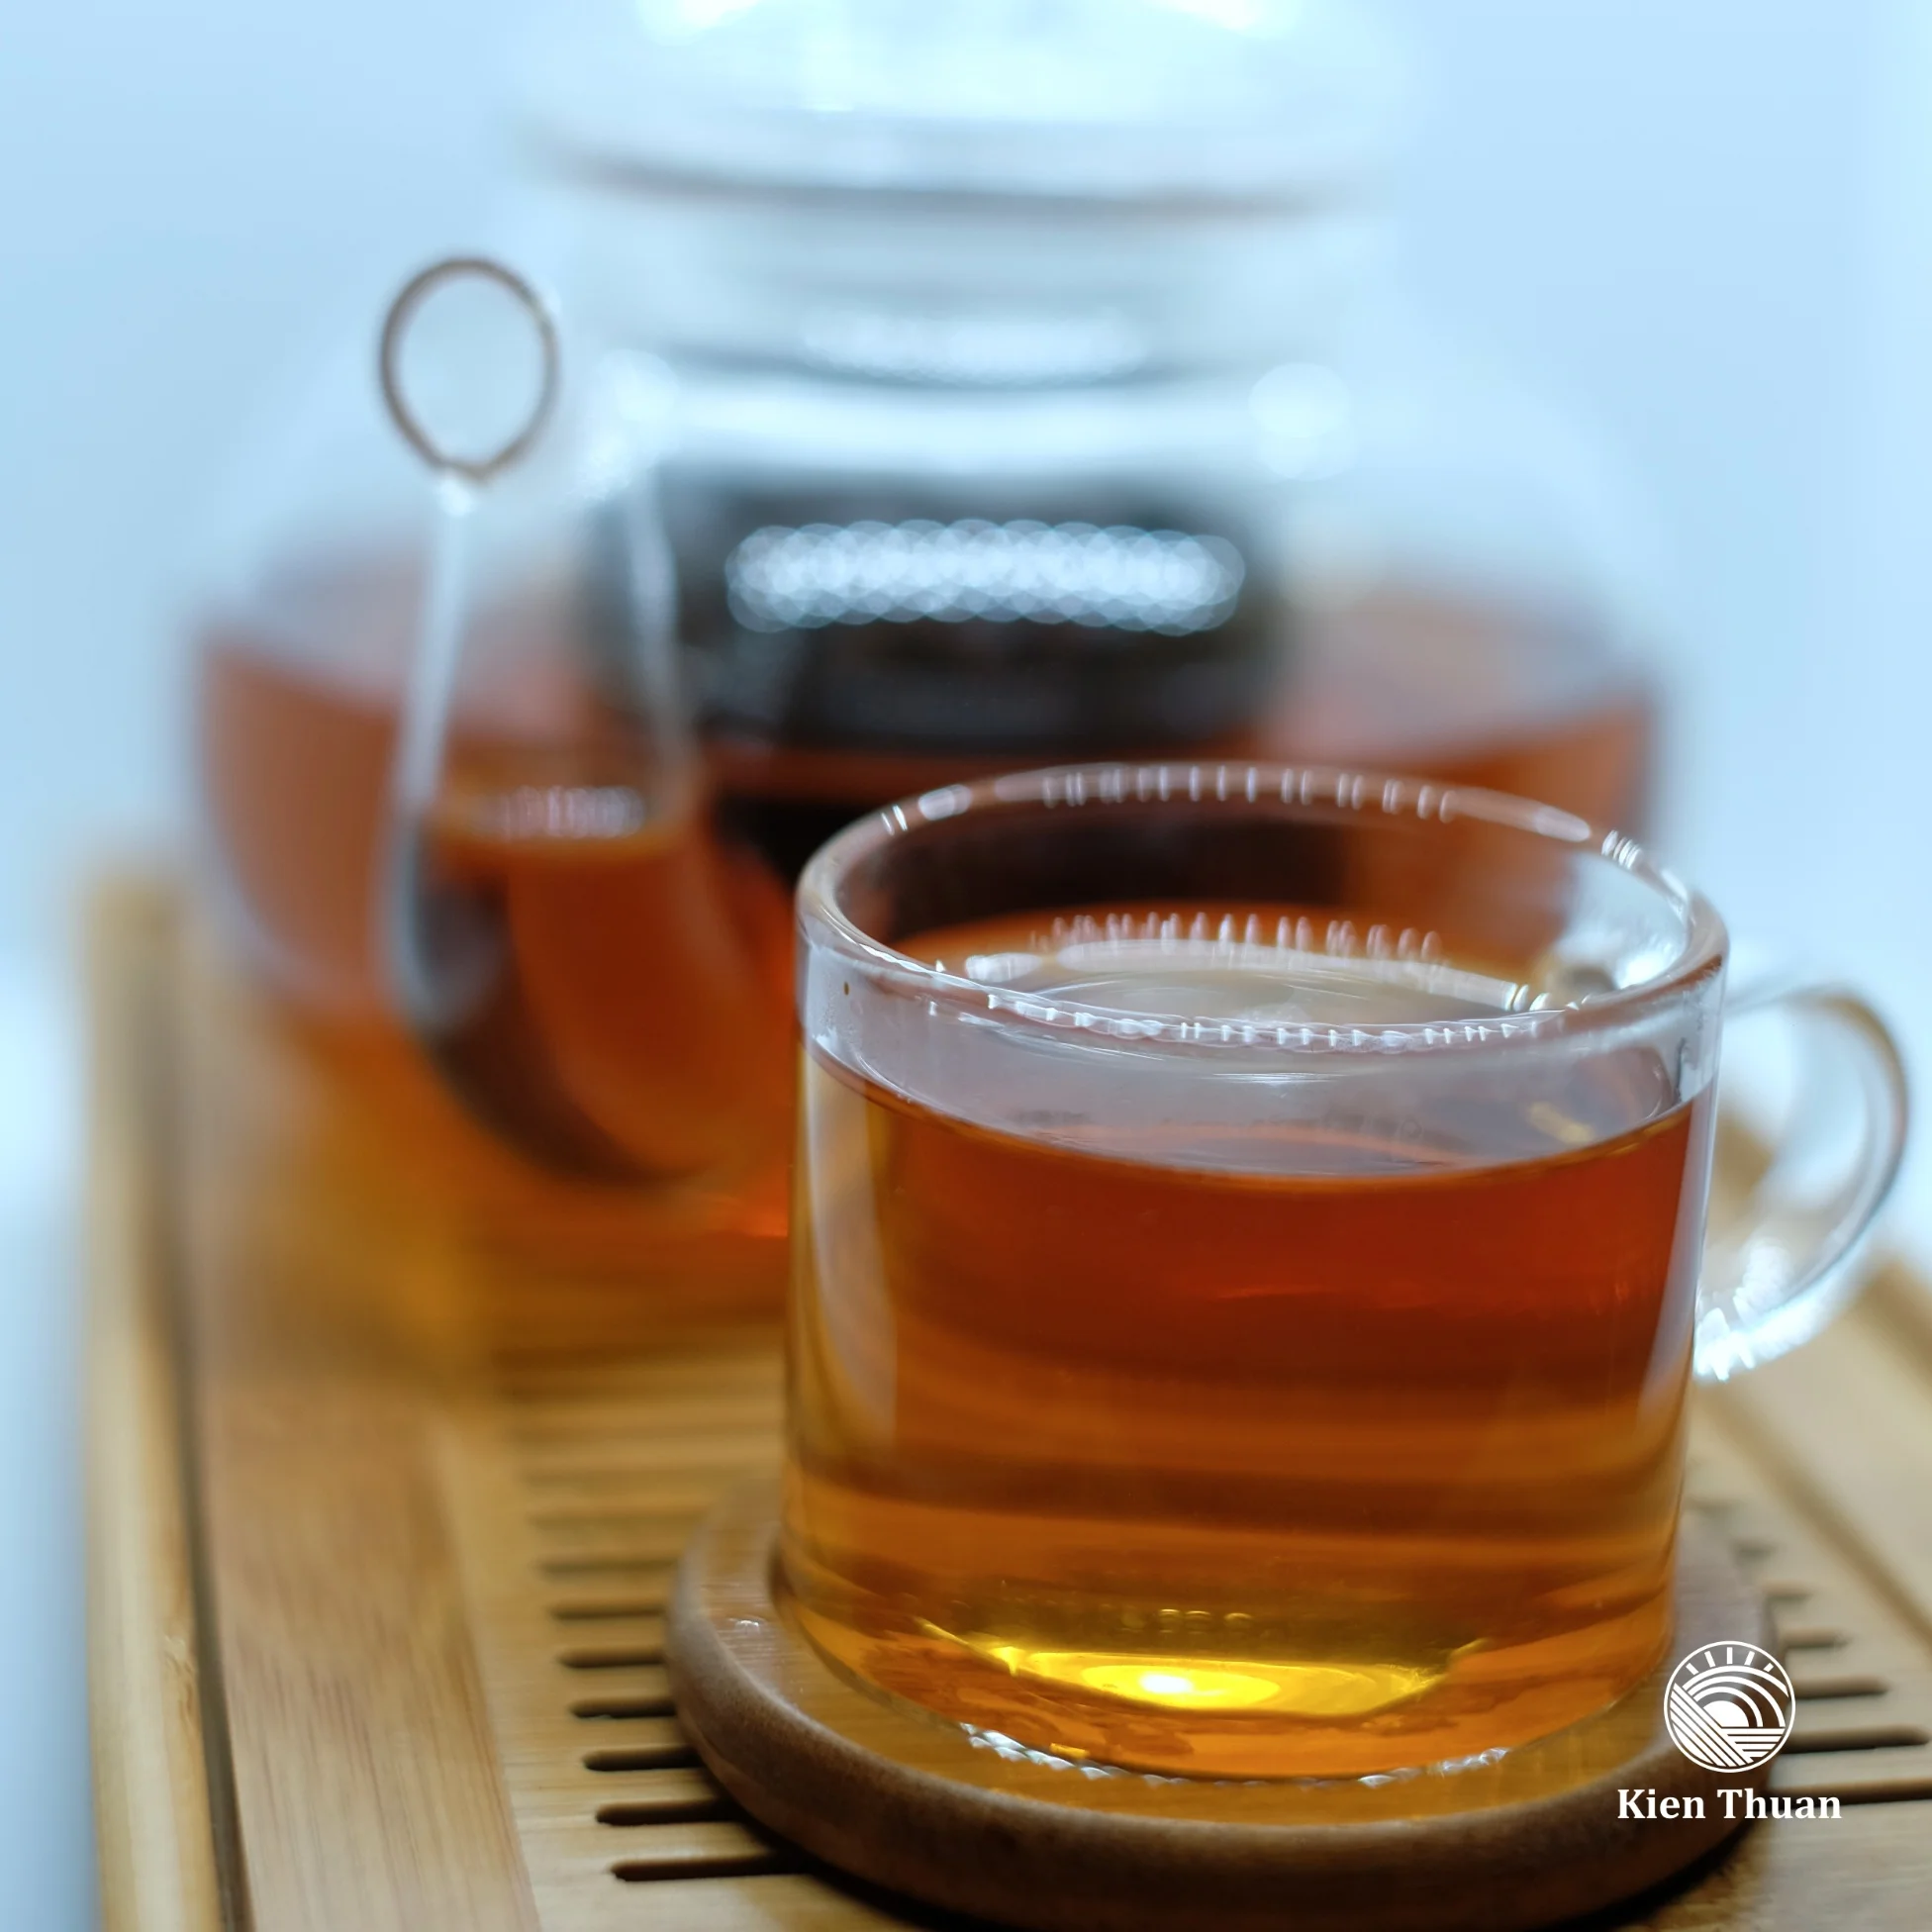 The best quality OPA ceylon black tea with long-lasting aroma and beautiful soup color from Vietnamese black tea manufacturer